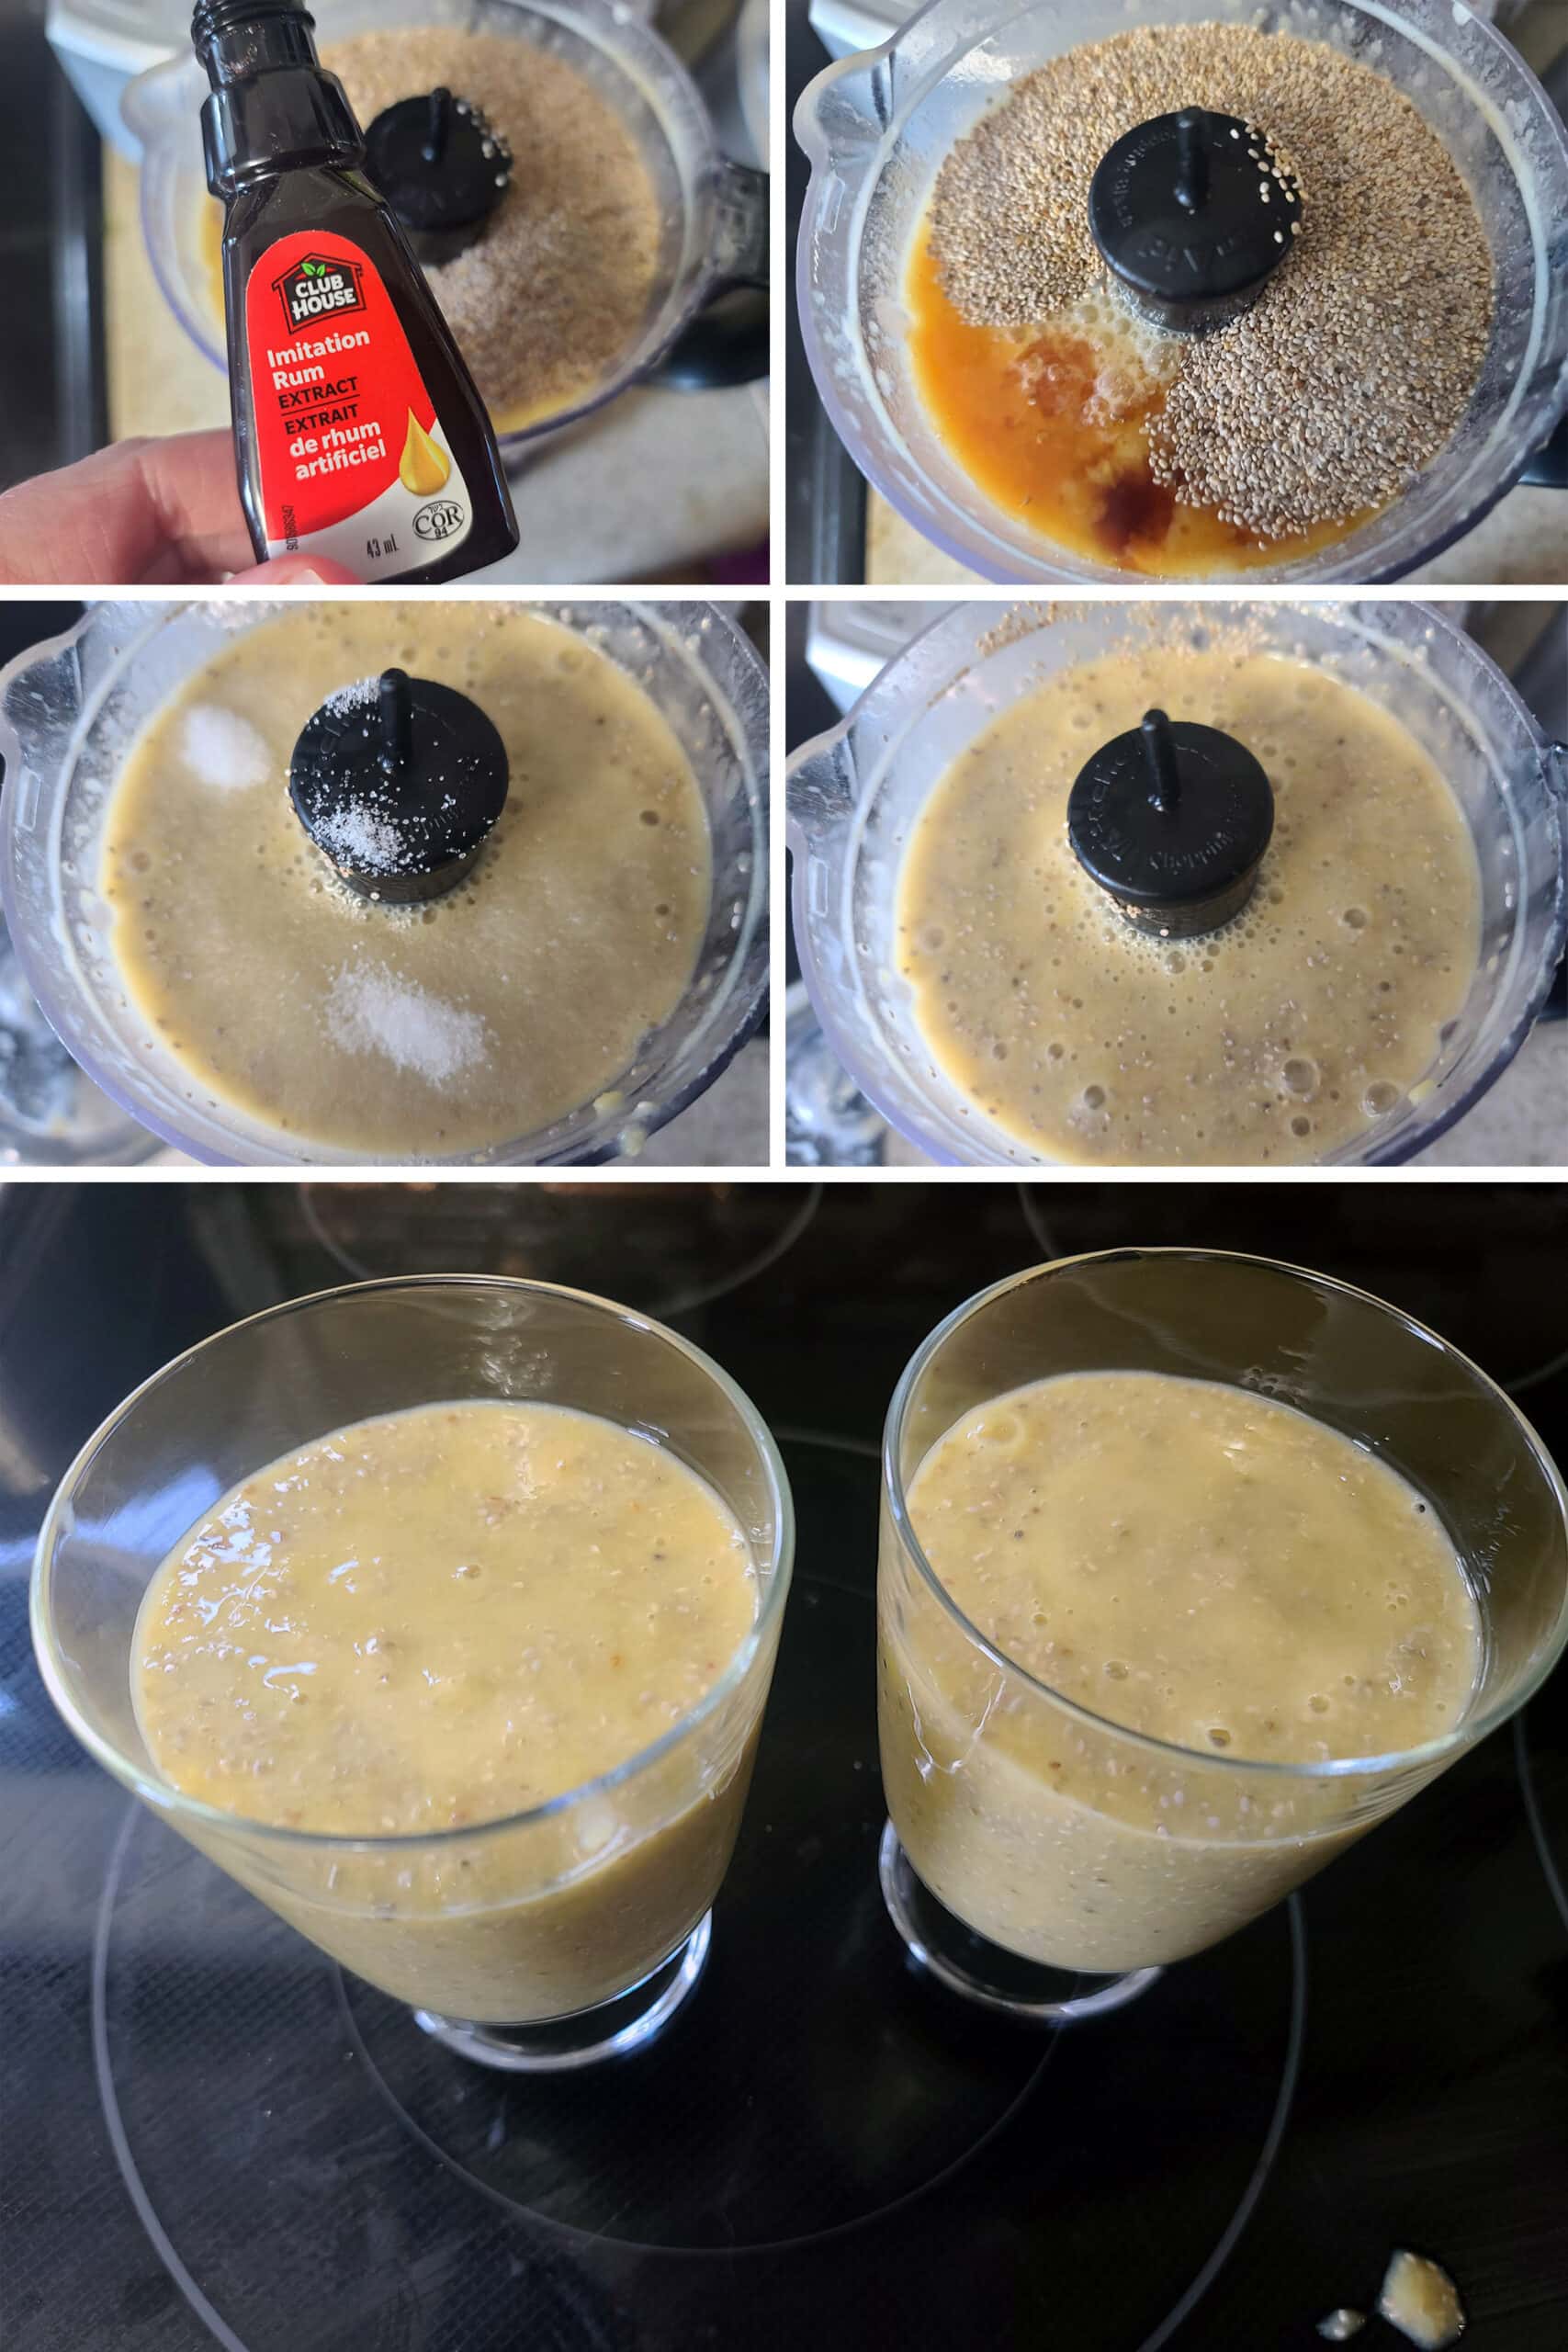 A 5 part image showing rum extract being added to the pureed mango, along with chia seeds, blended, and poured into glasses.